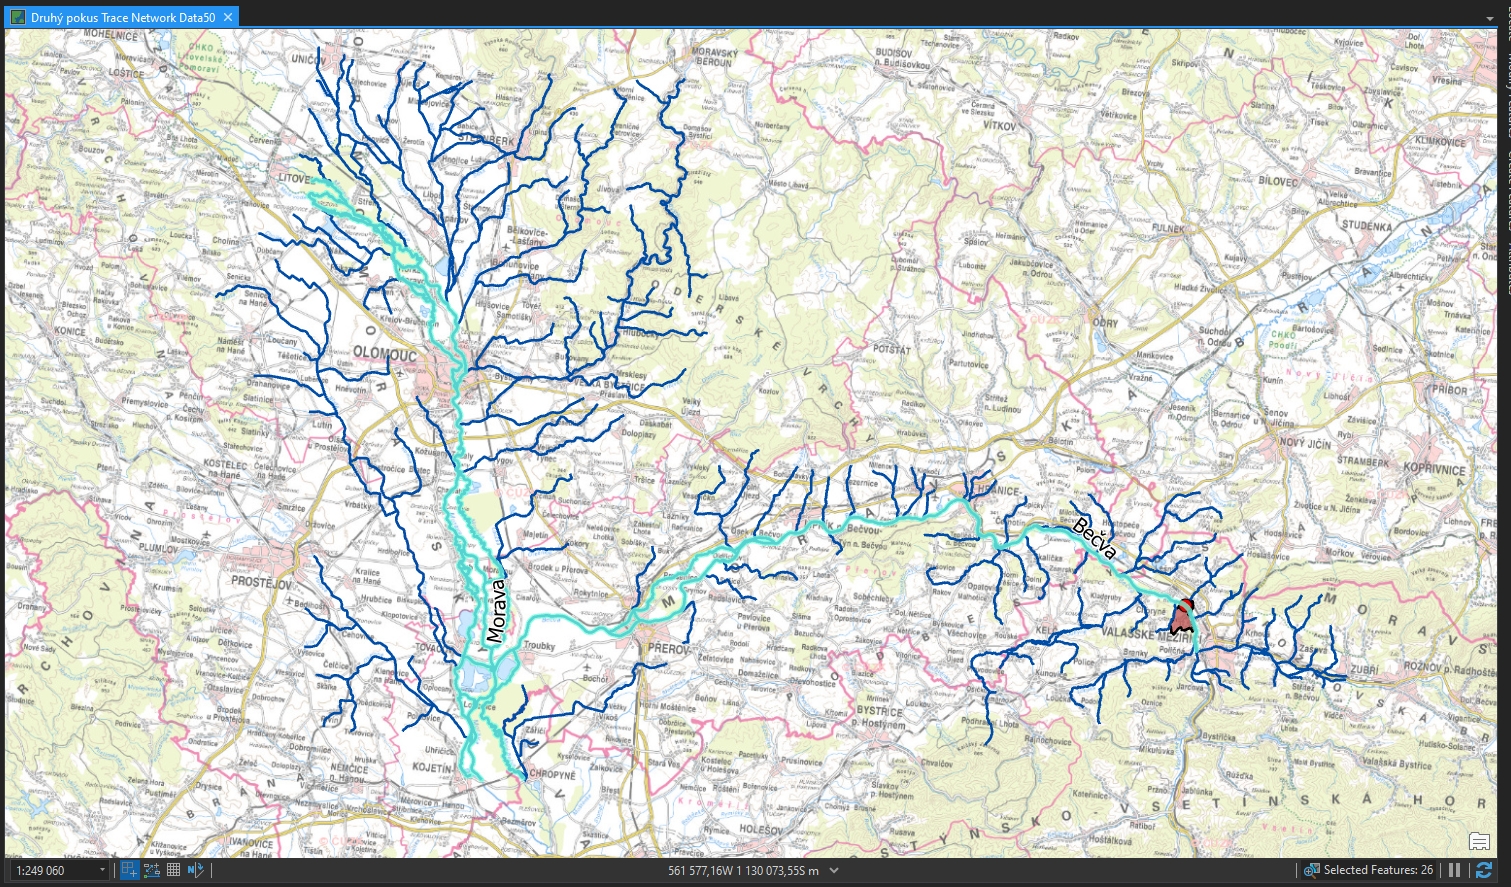 Downstream in river network